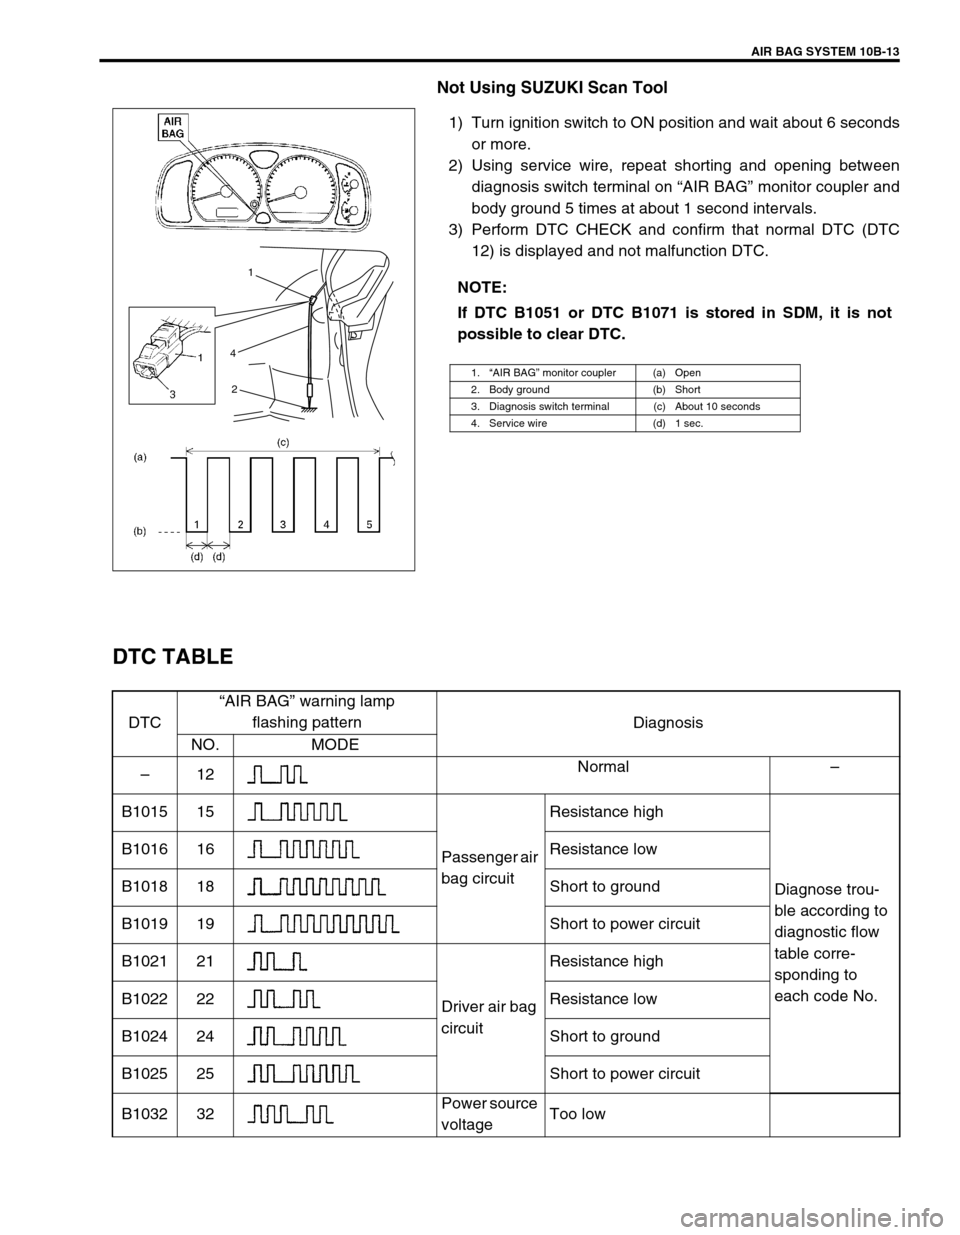 SUZUKI SWIFT 2000 1.G Transmission Service Workshop Manual AIR BAG SYSTEM 10B-13
Not Using SUZUKI Scan Tool
1) Turn ignition switch to ON position and wait about 6 seconds
or more.
2) Using service wire, repeat shorting and opening between
diagnosis switch te